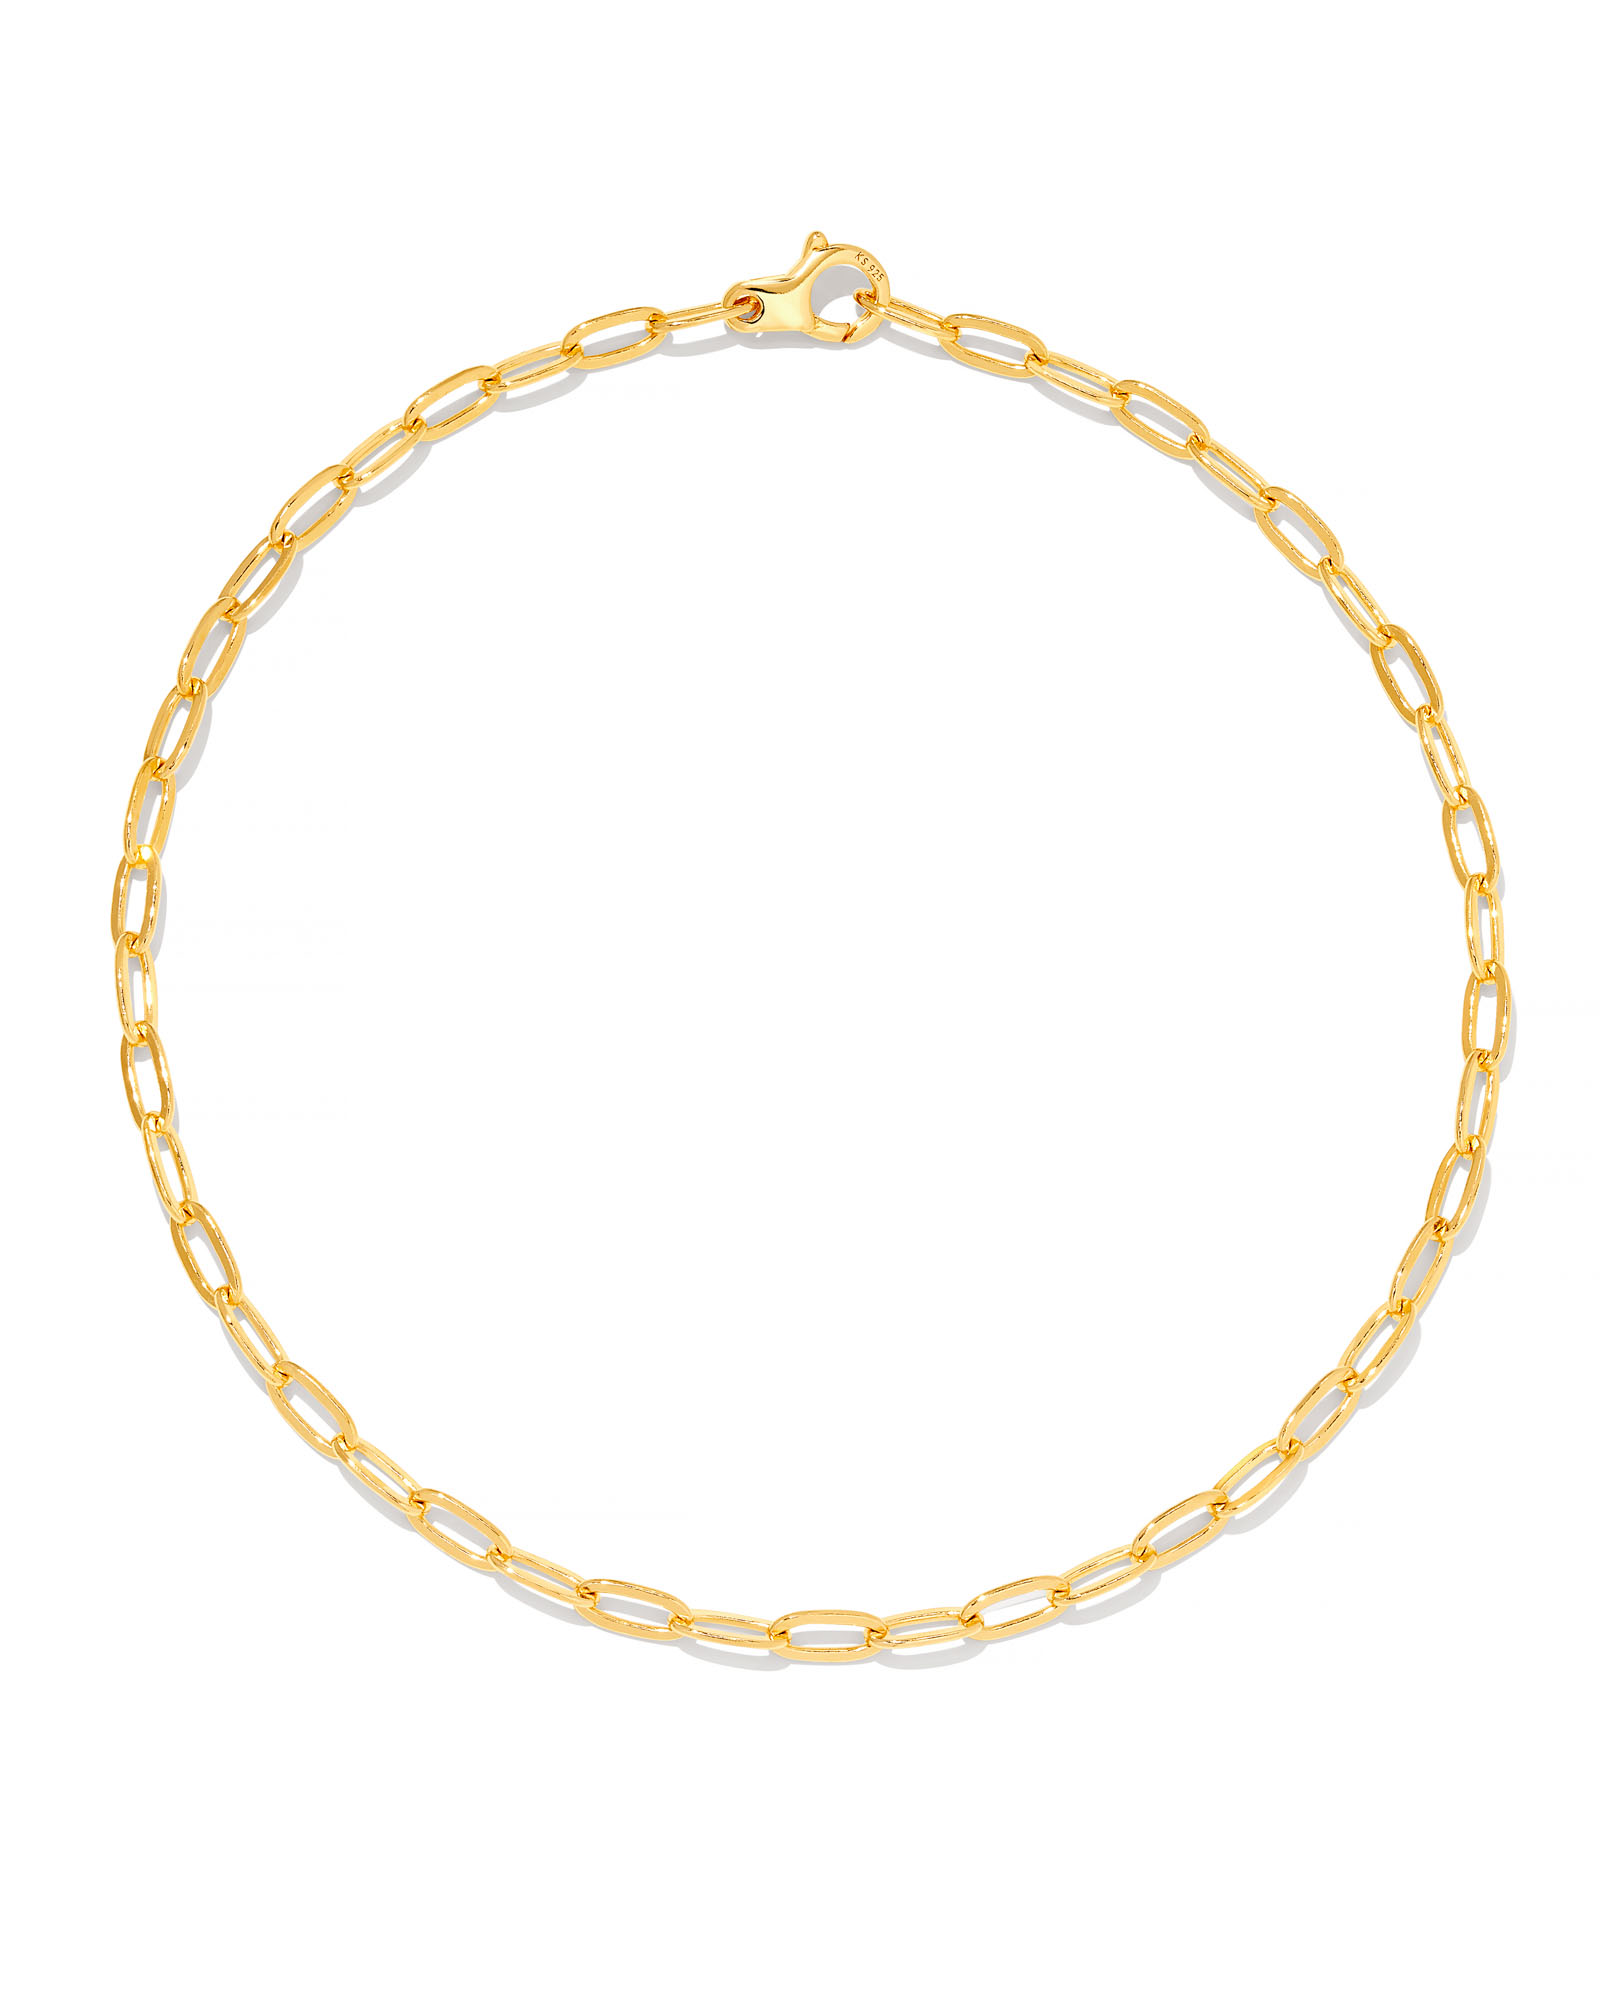 Small Paperclip Chain Necklace in 18k Gold Vermeil